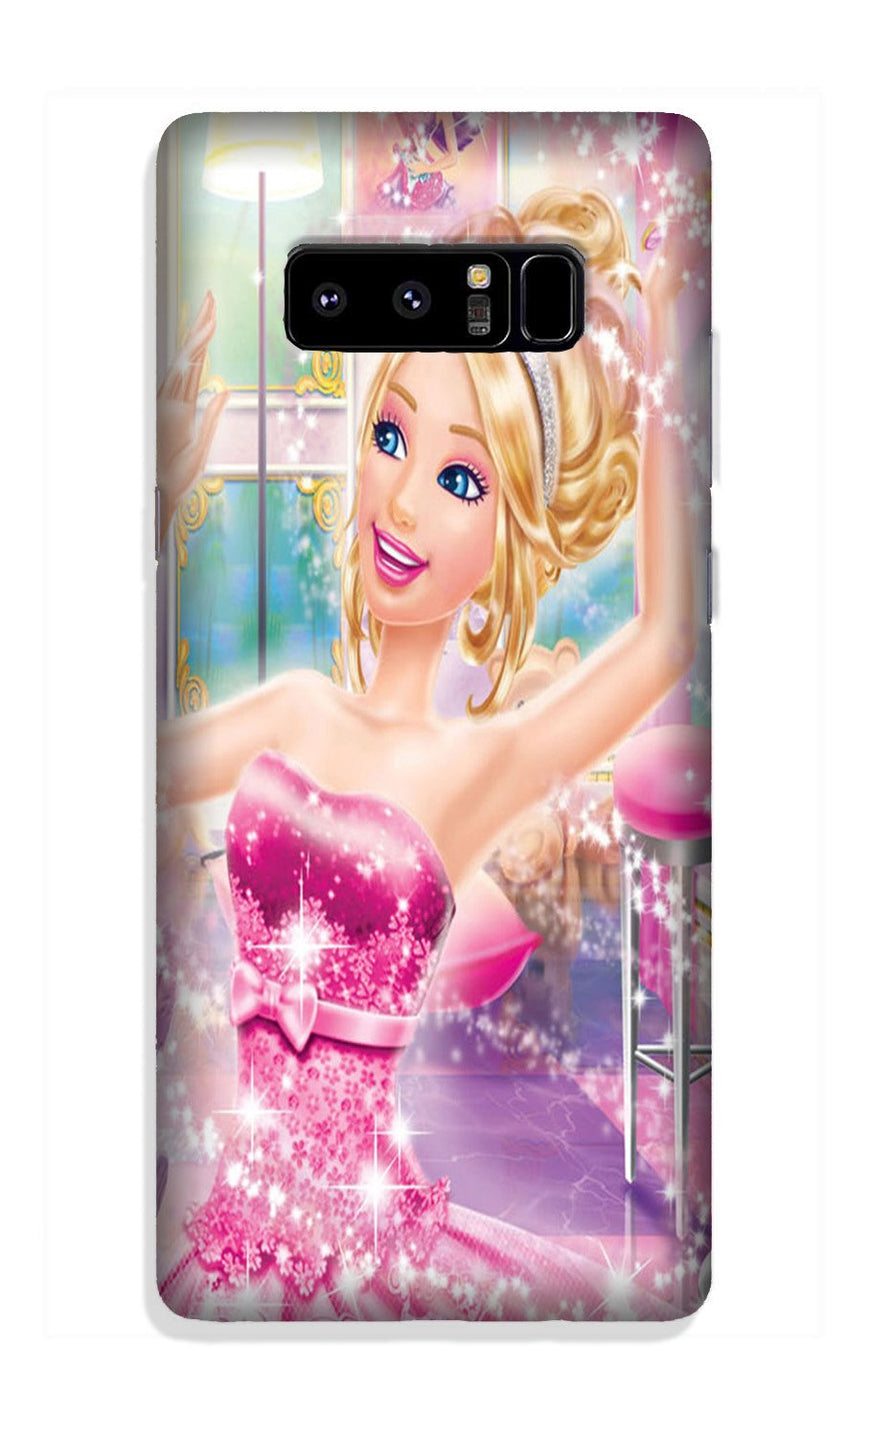 Princesses Case for Galaxy Note 8